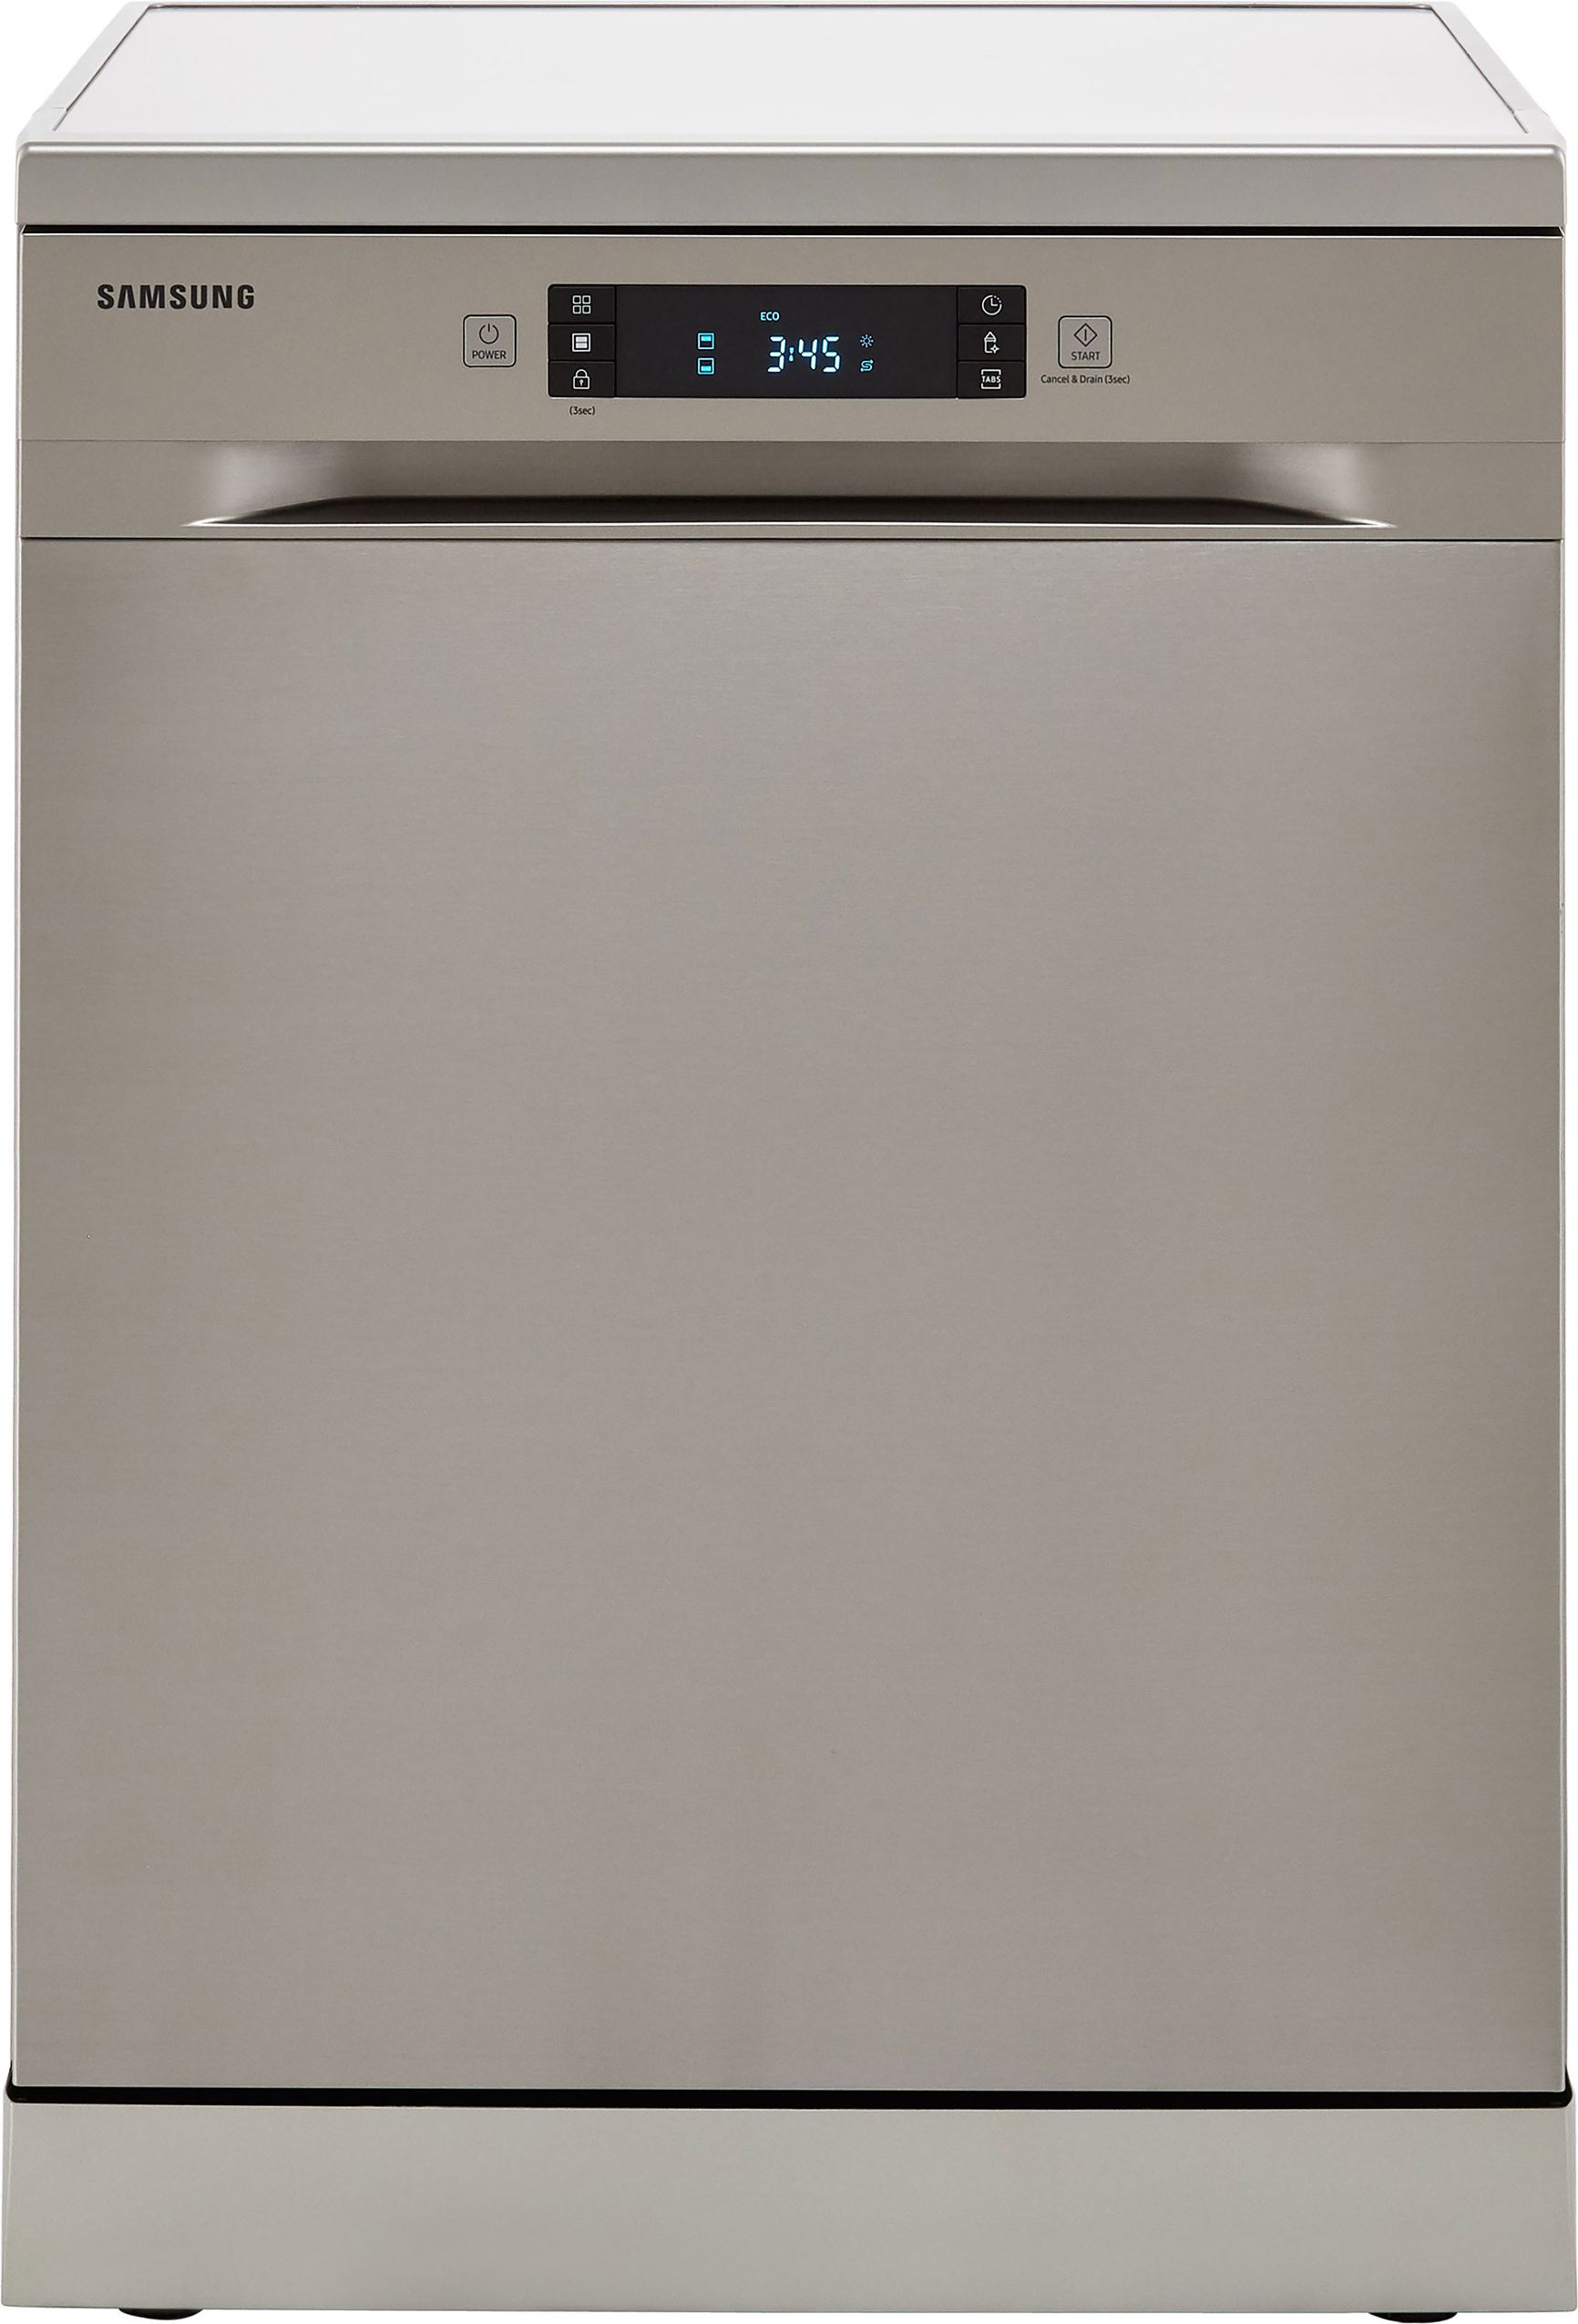 Samsung Series 6 DW60M6050FS Standard Dishwasher - Stainless Steel - E Rated, Stainless Steel